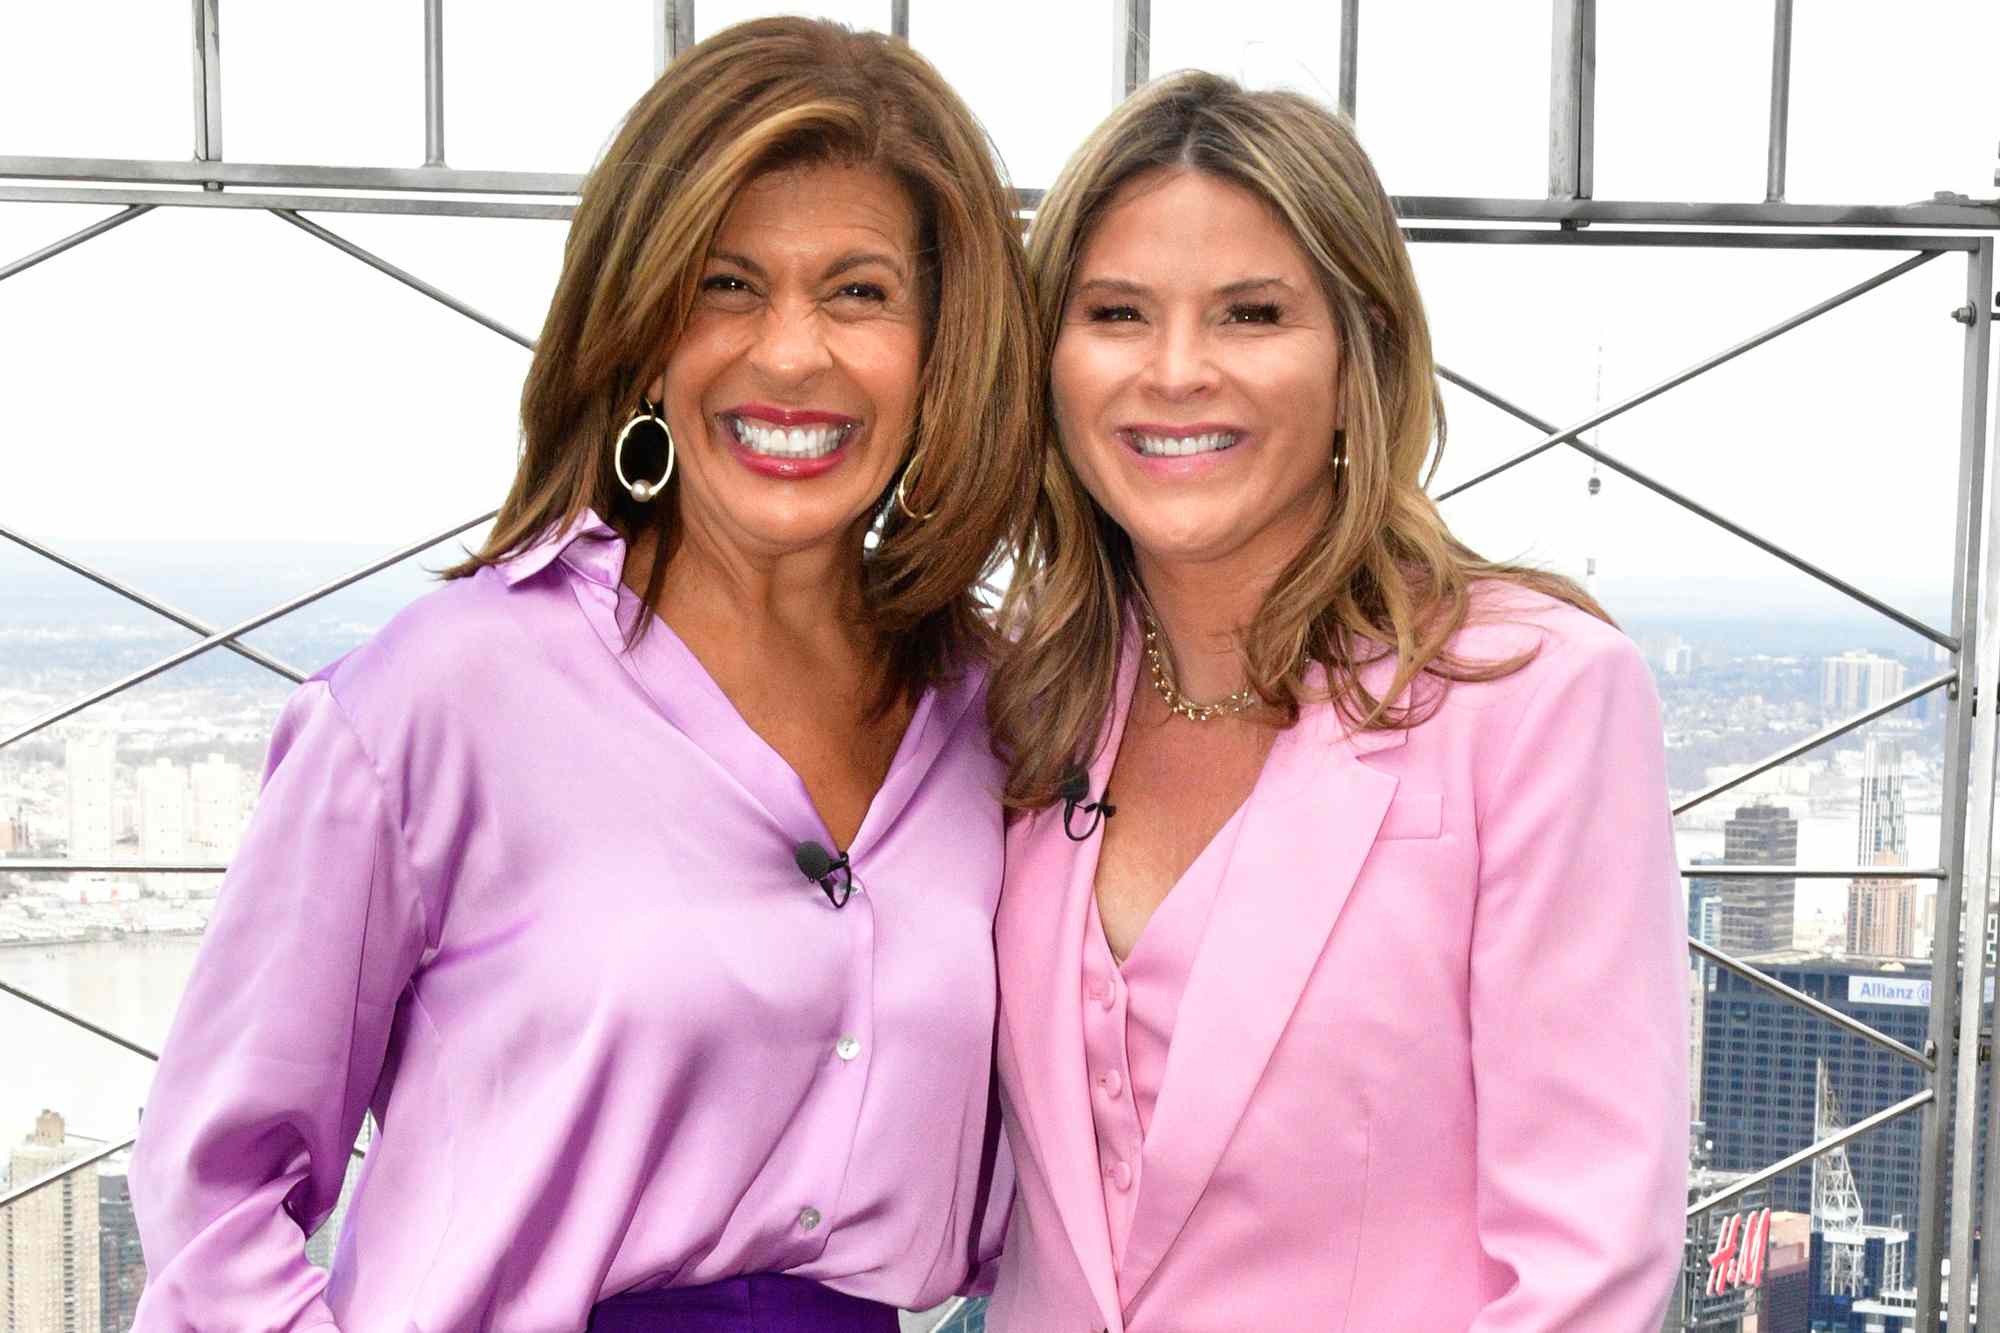 Hoda Kotb and Jenna Bush Hager Reveal Mother's Day Plans as They Share Why They Love Being Moms (Exclusive)